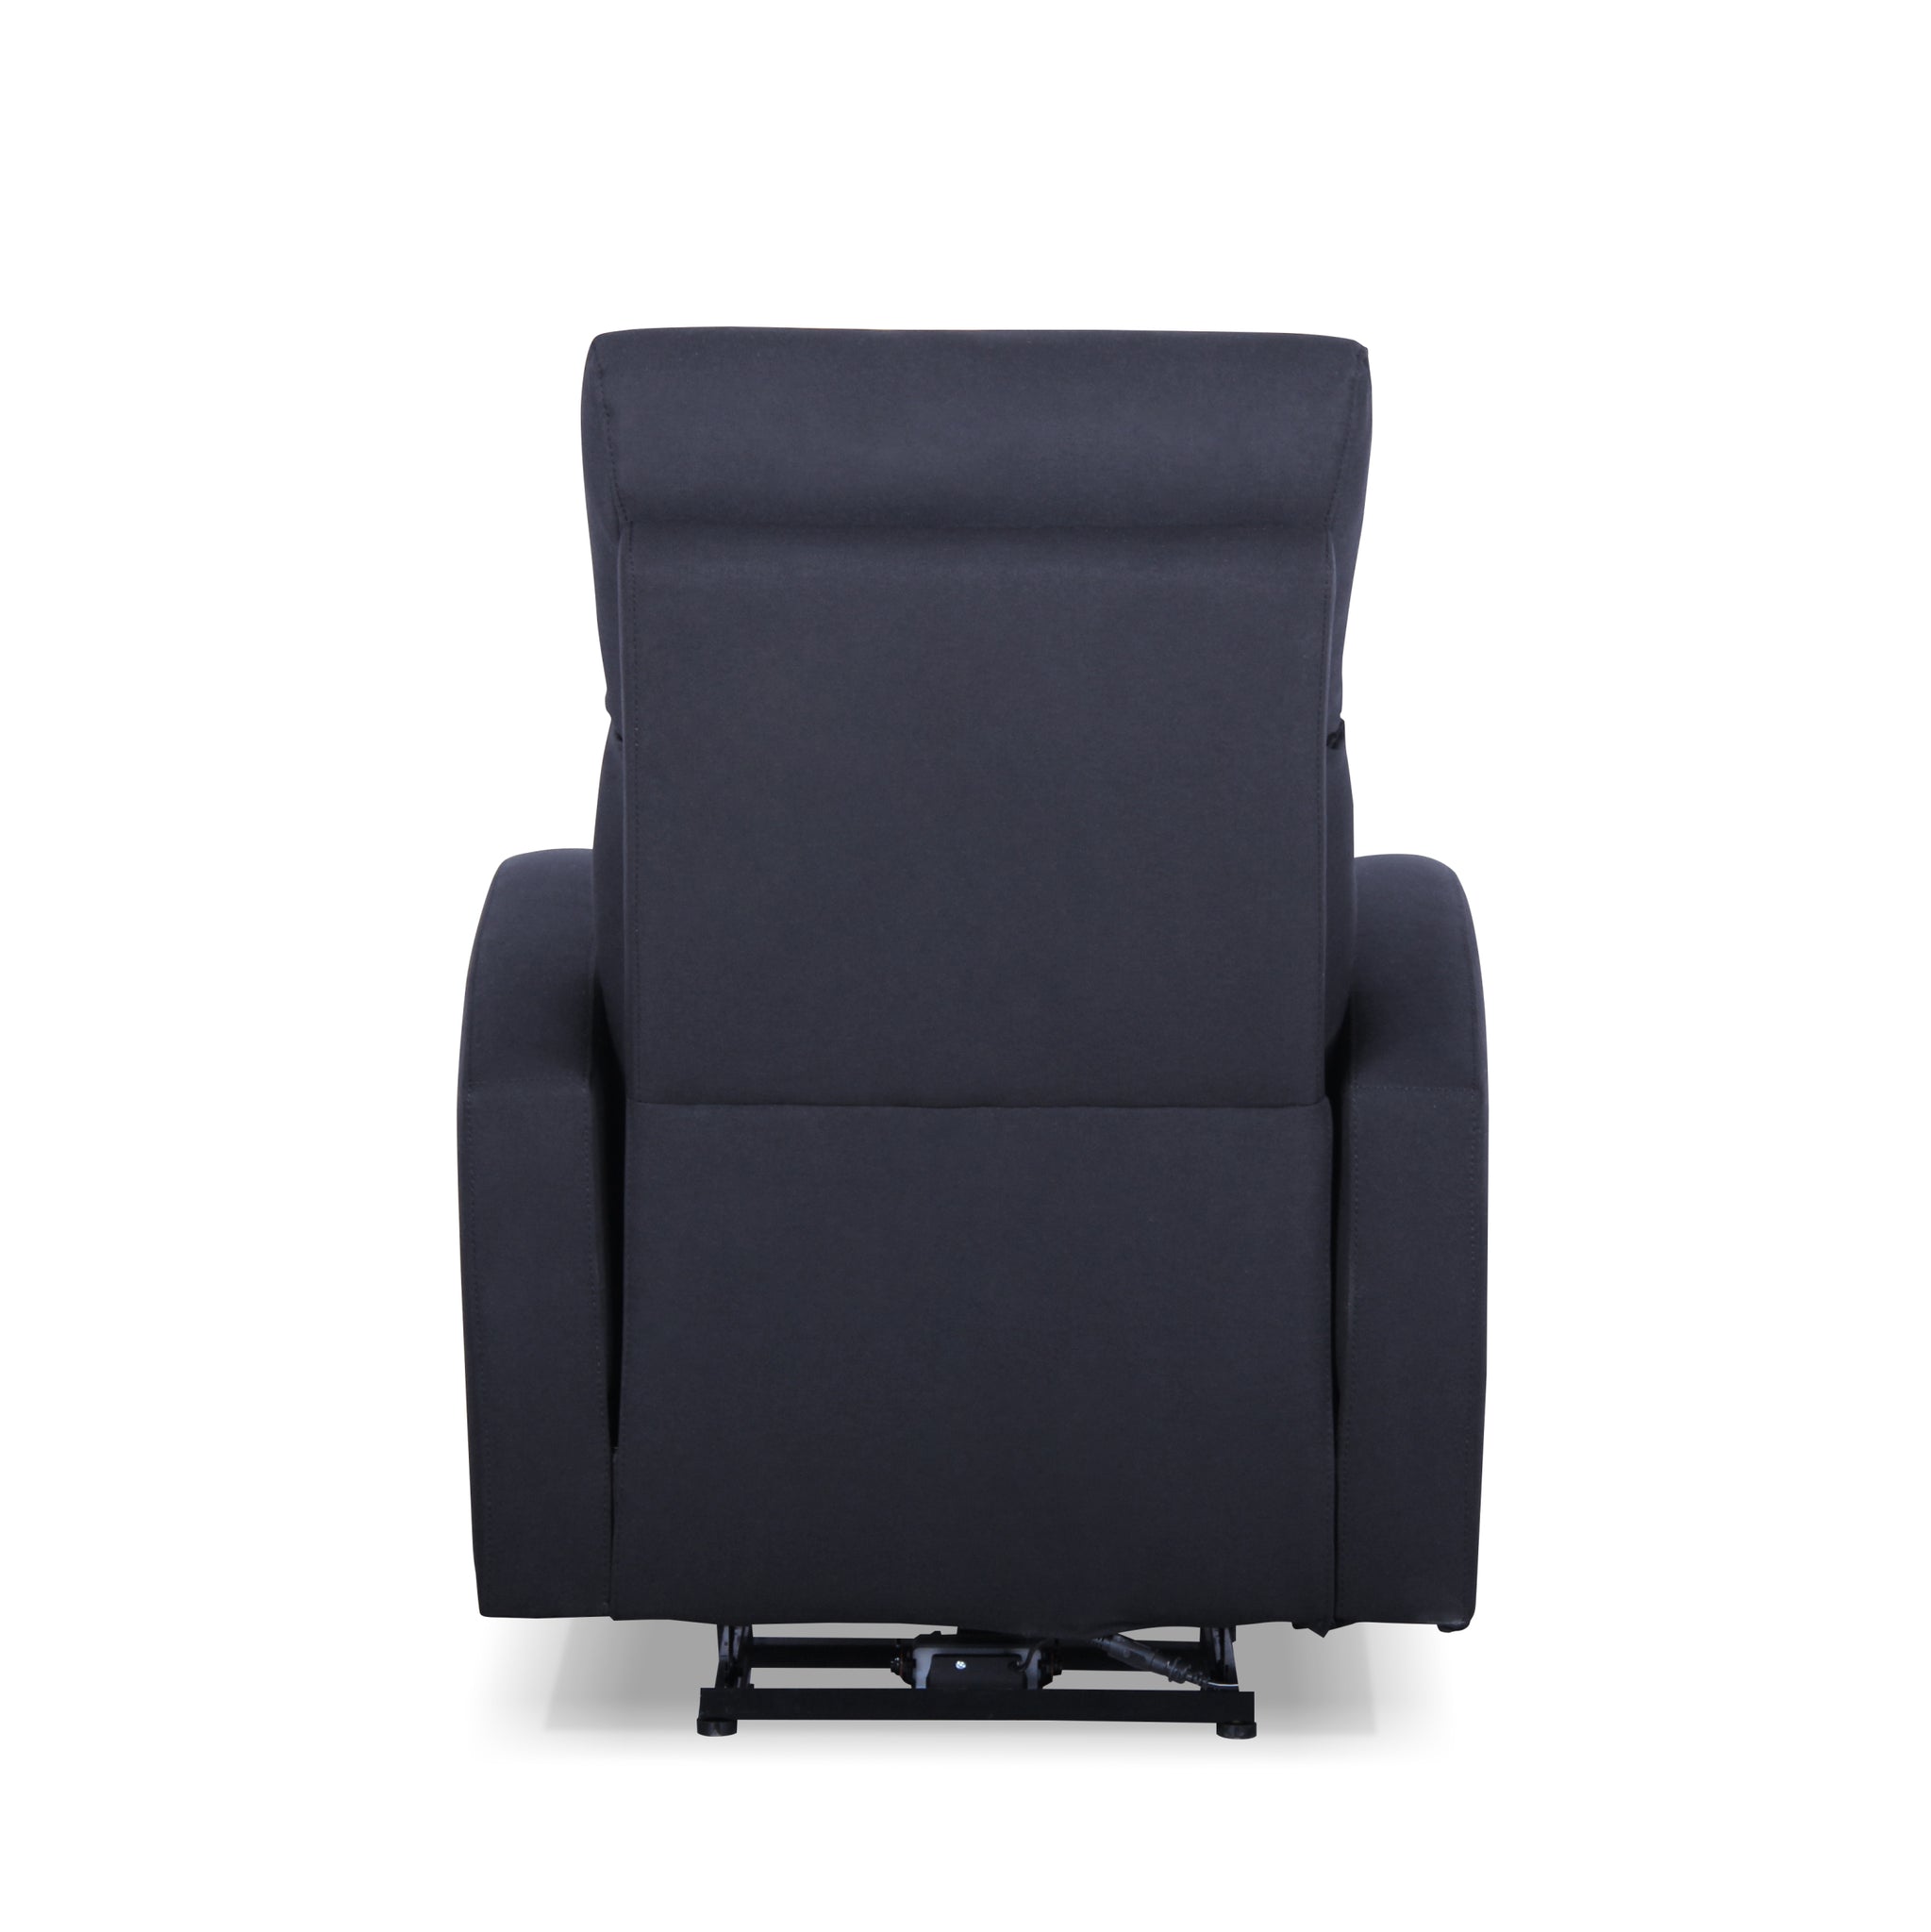 Cork Power Recliner with USB Charger black-fabric